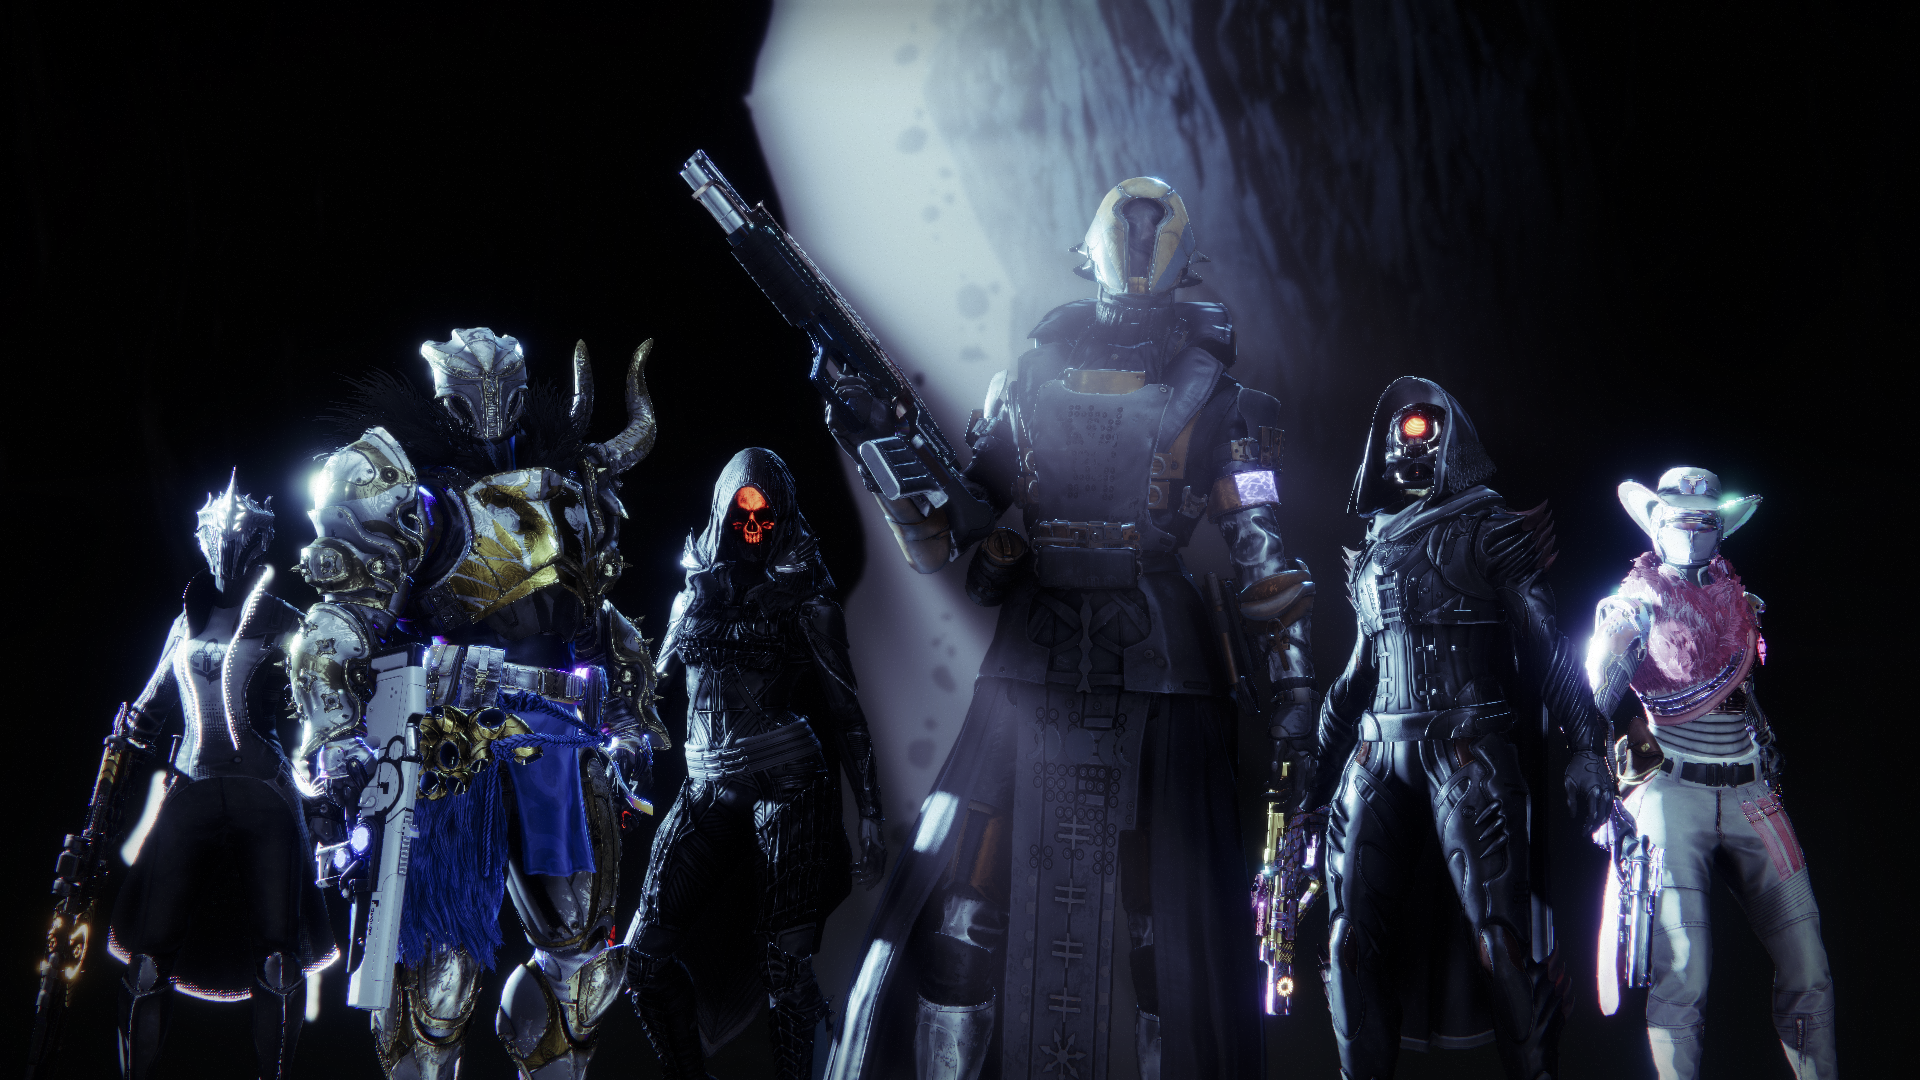 Destiny 2 The guardian team poses before the fight